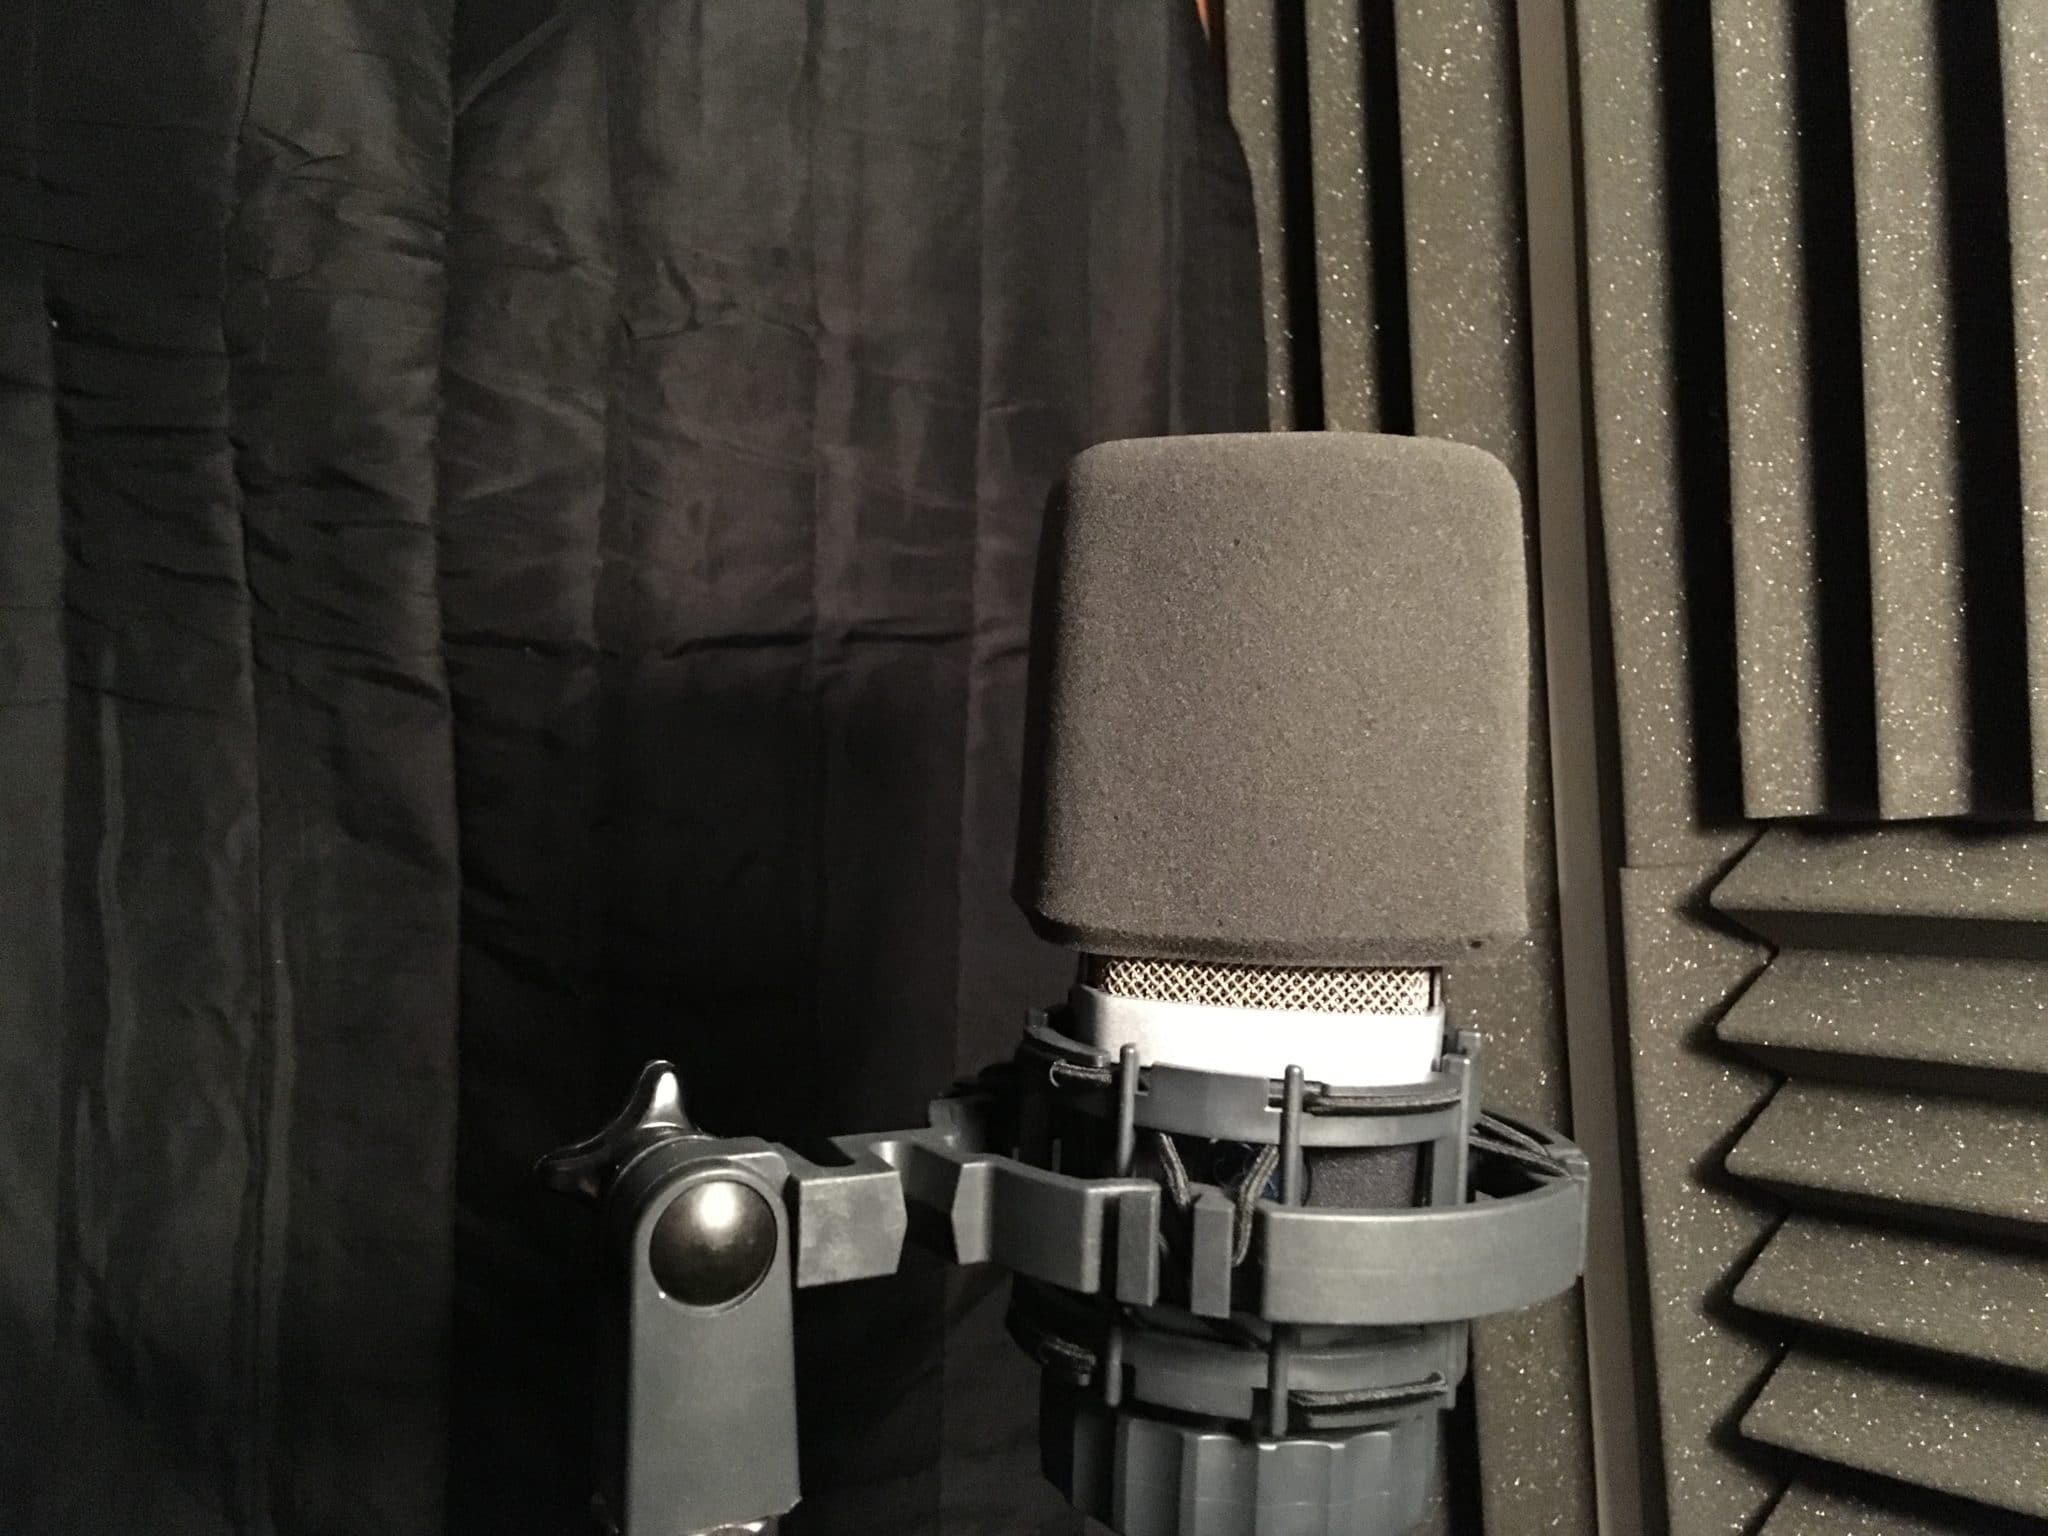 Acoustic Blanket in booth with microphone